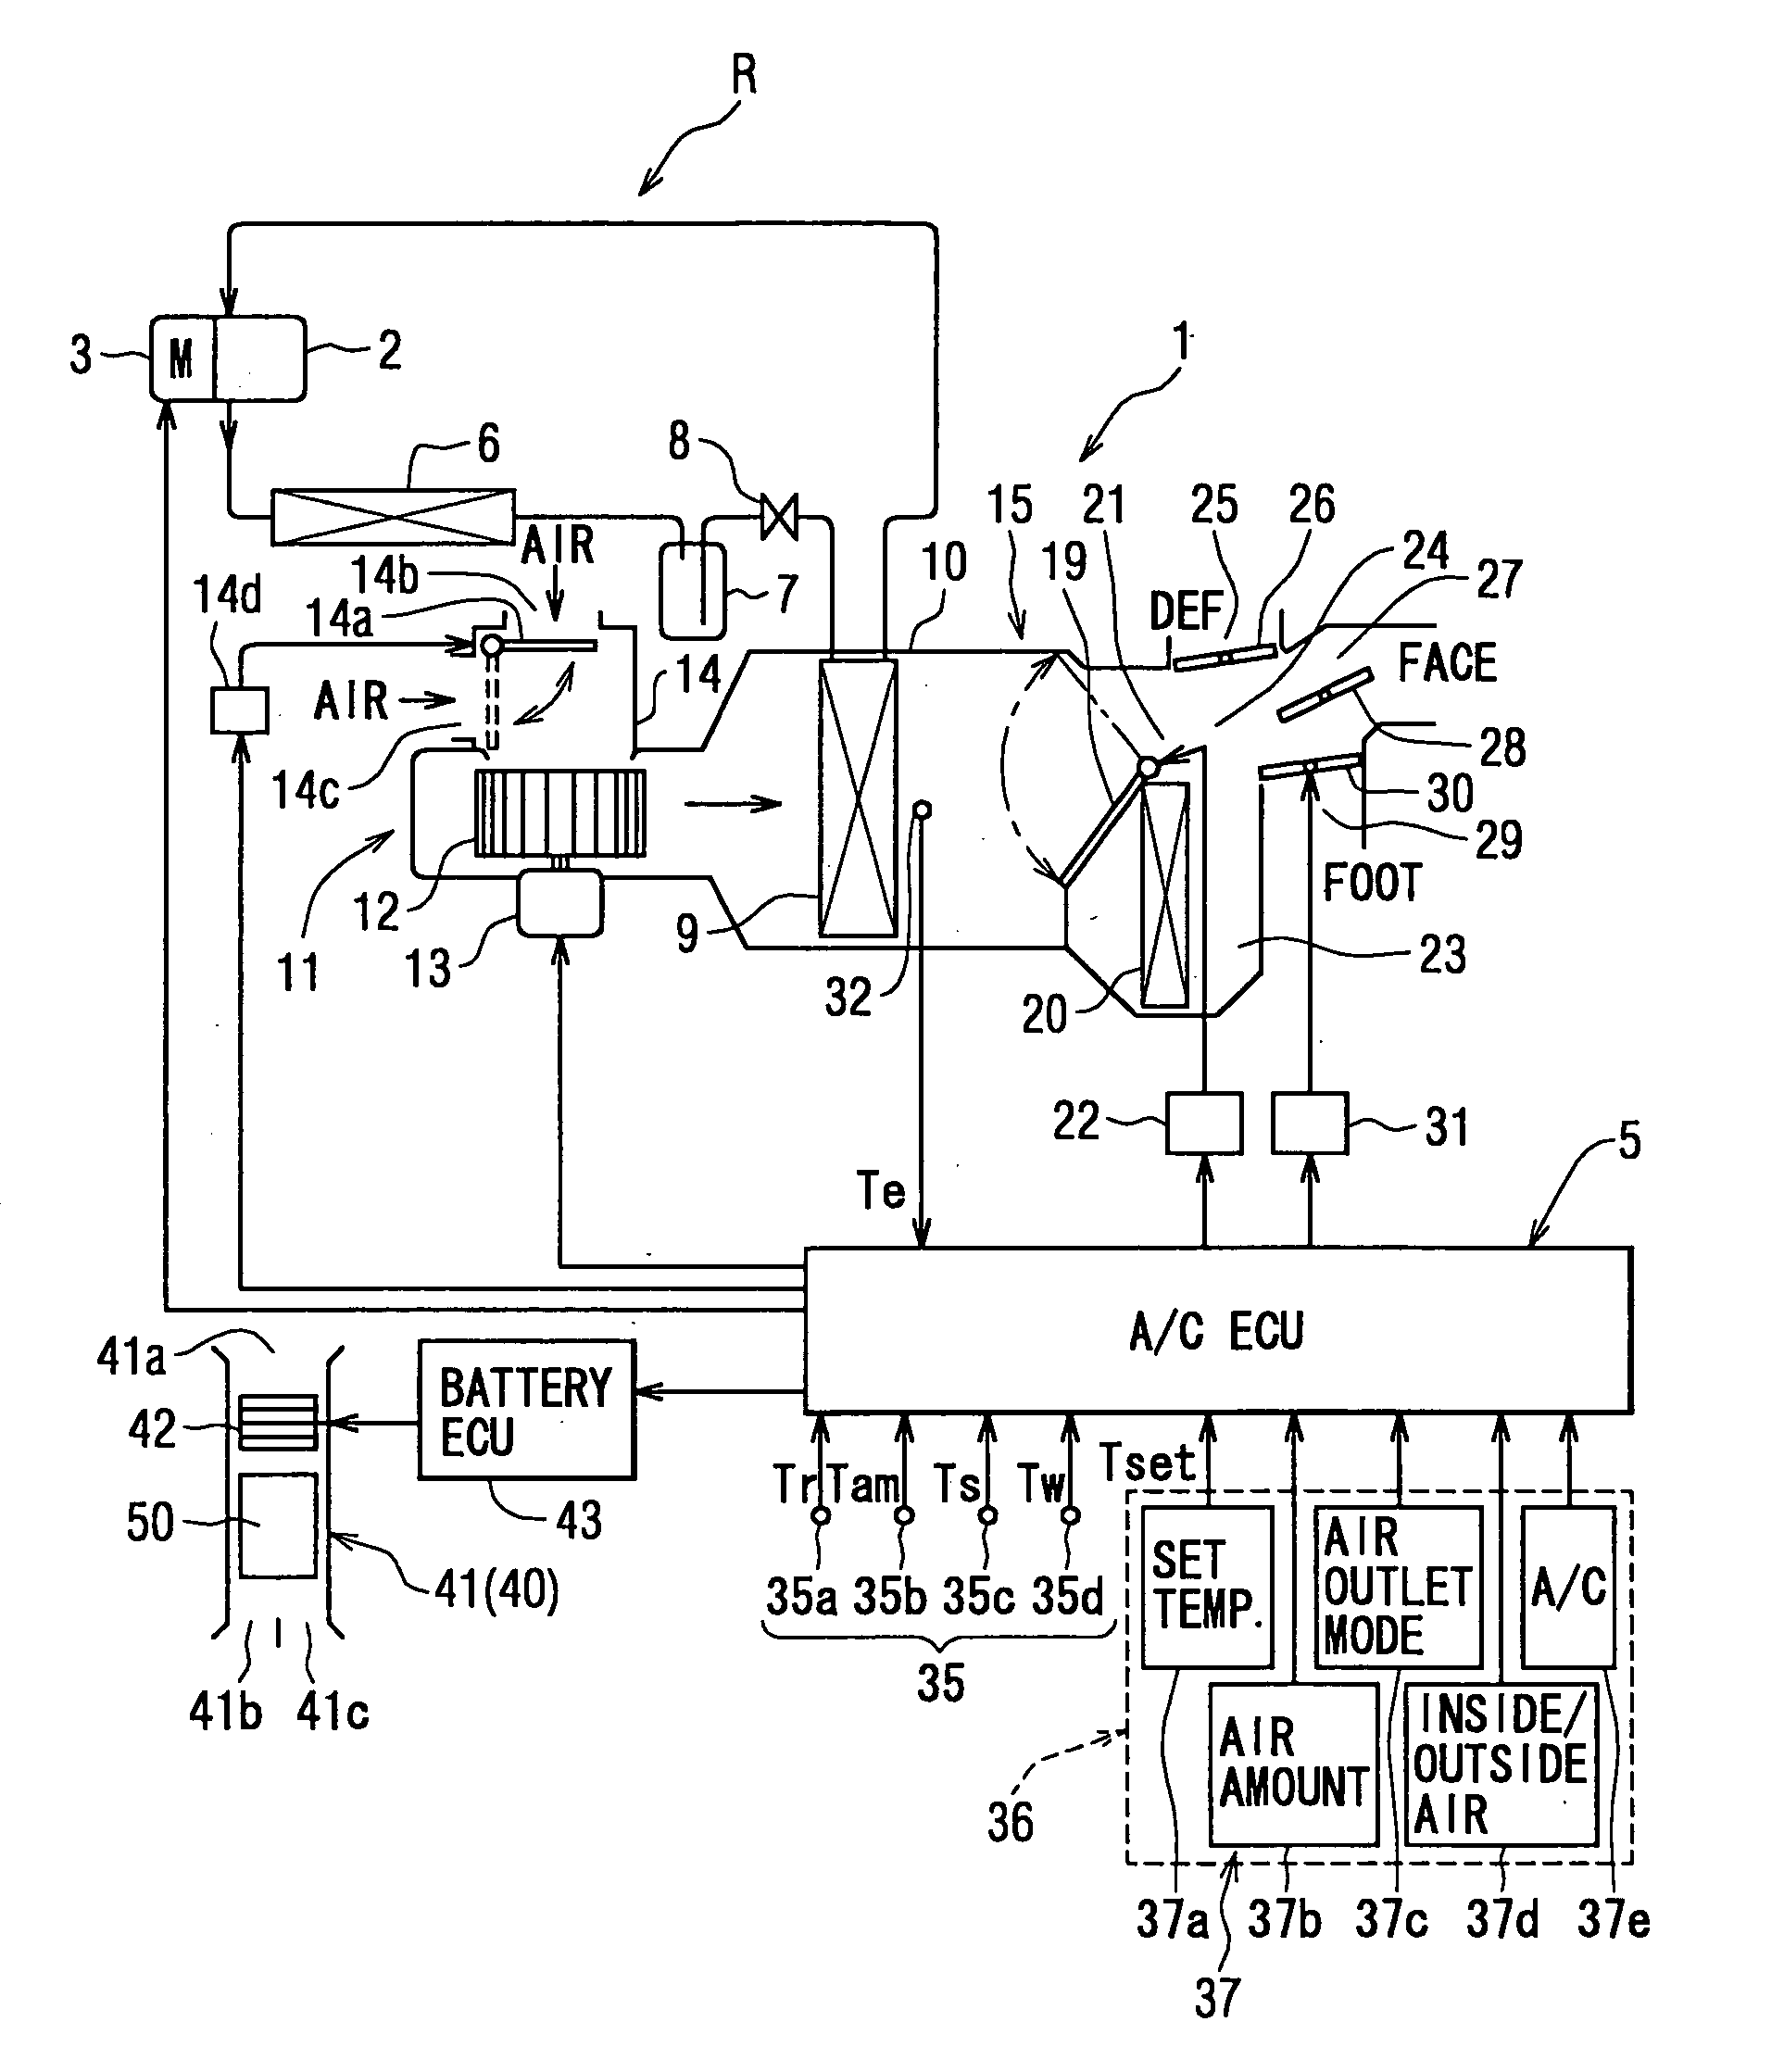 Battery cooling system for vehicle